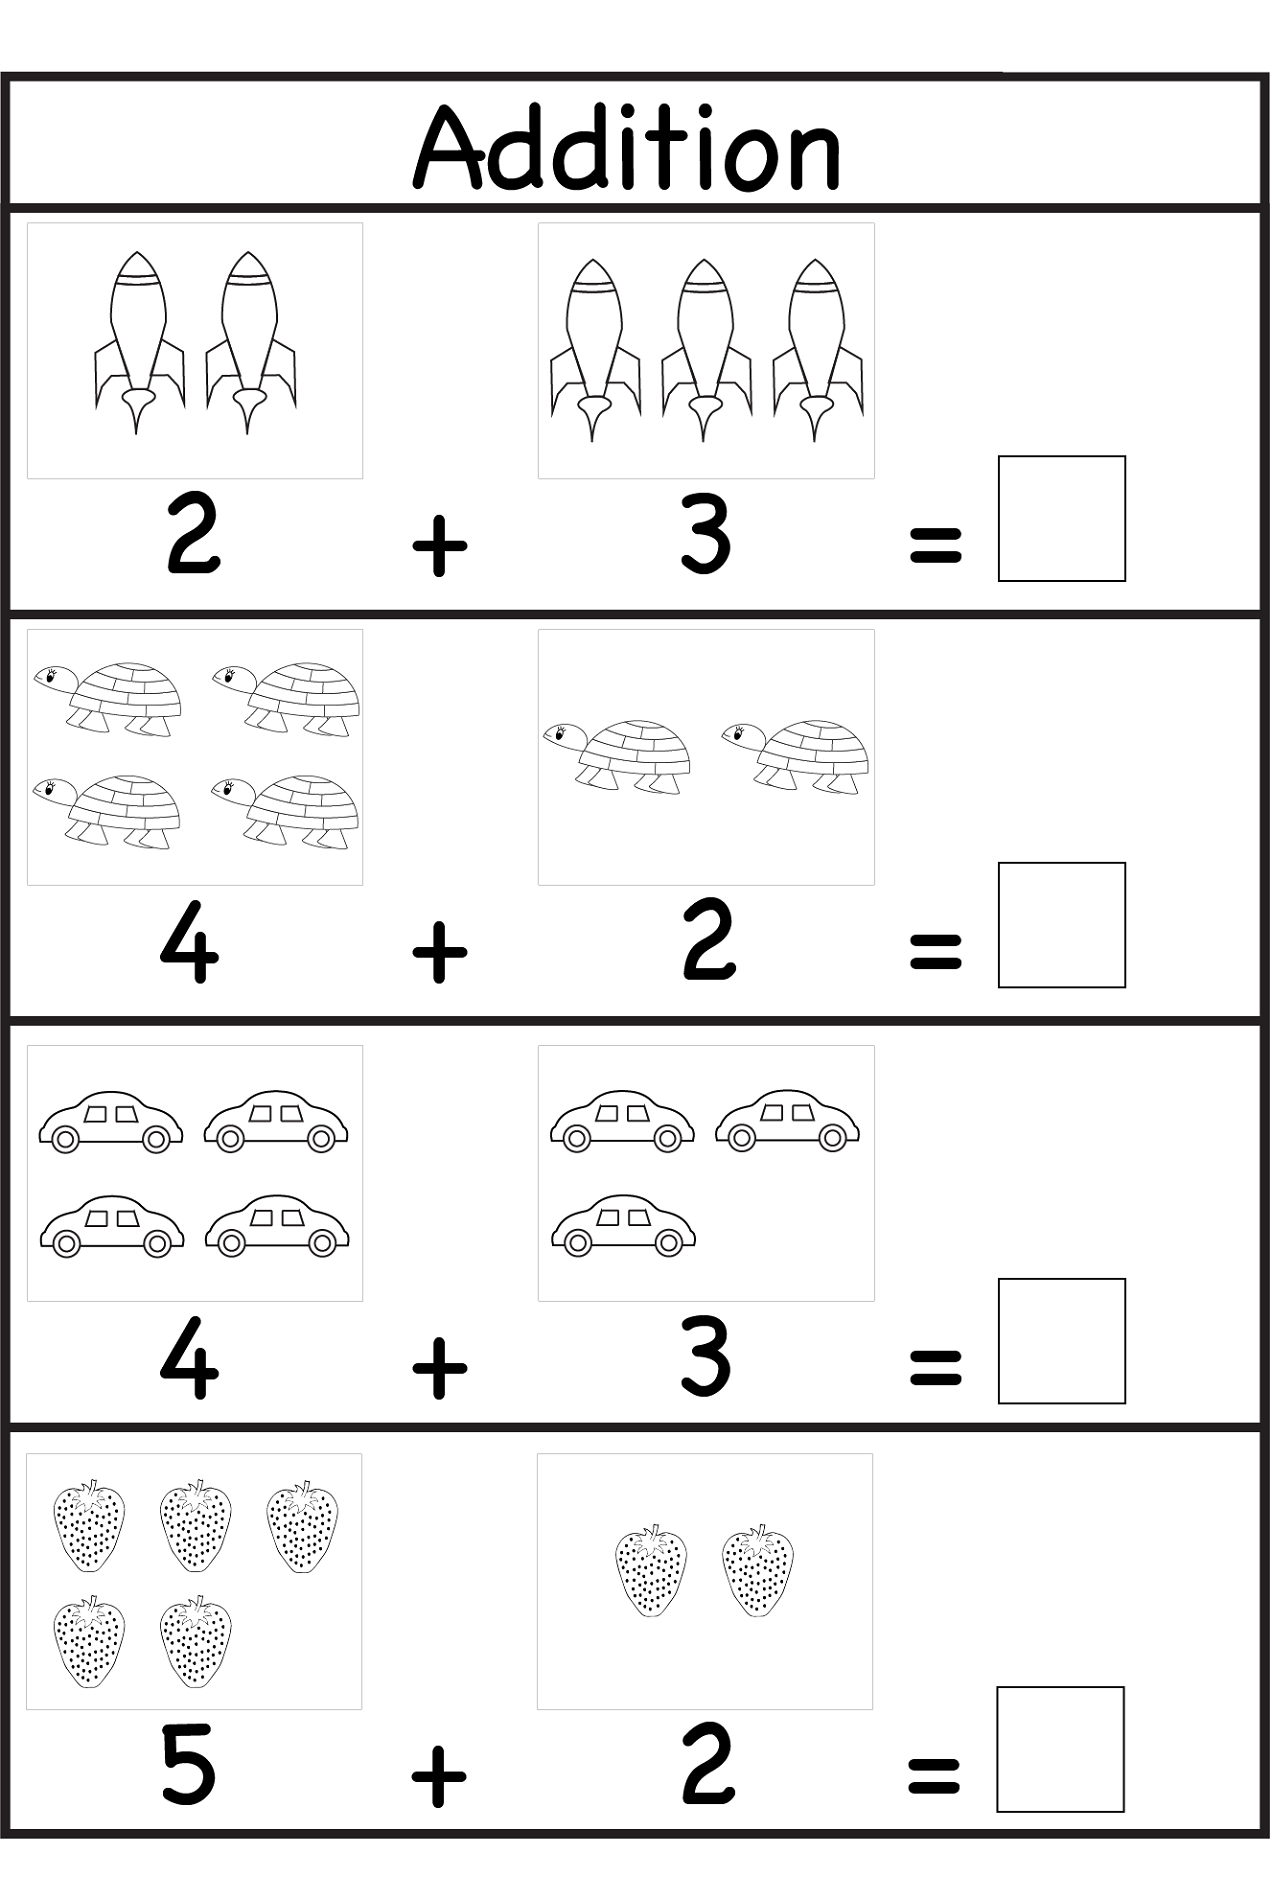 Worksheets For Three Years Old Activity Shelter